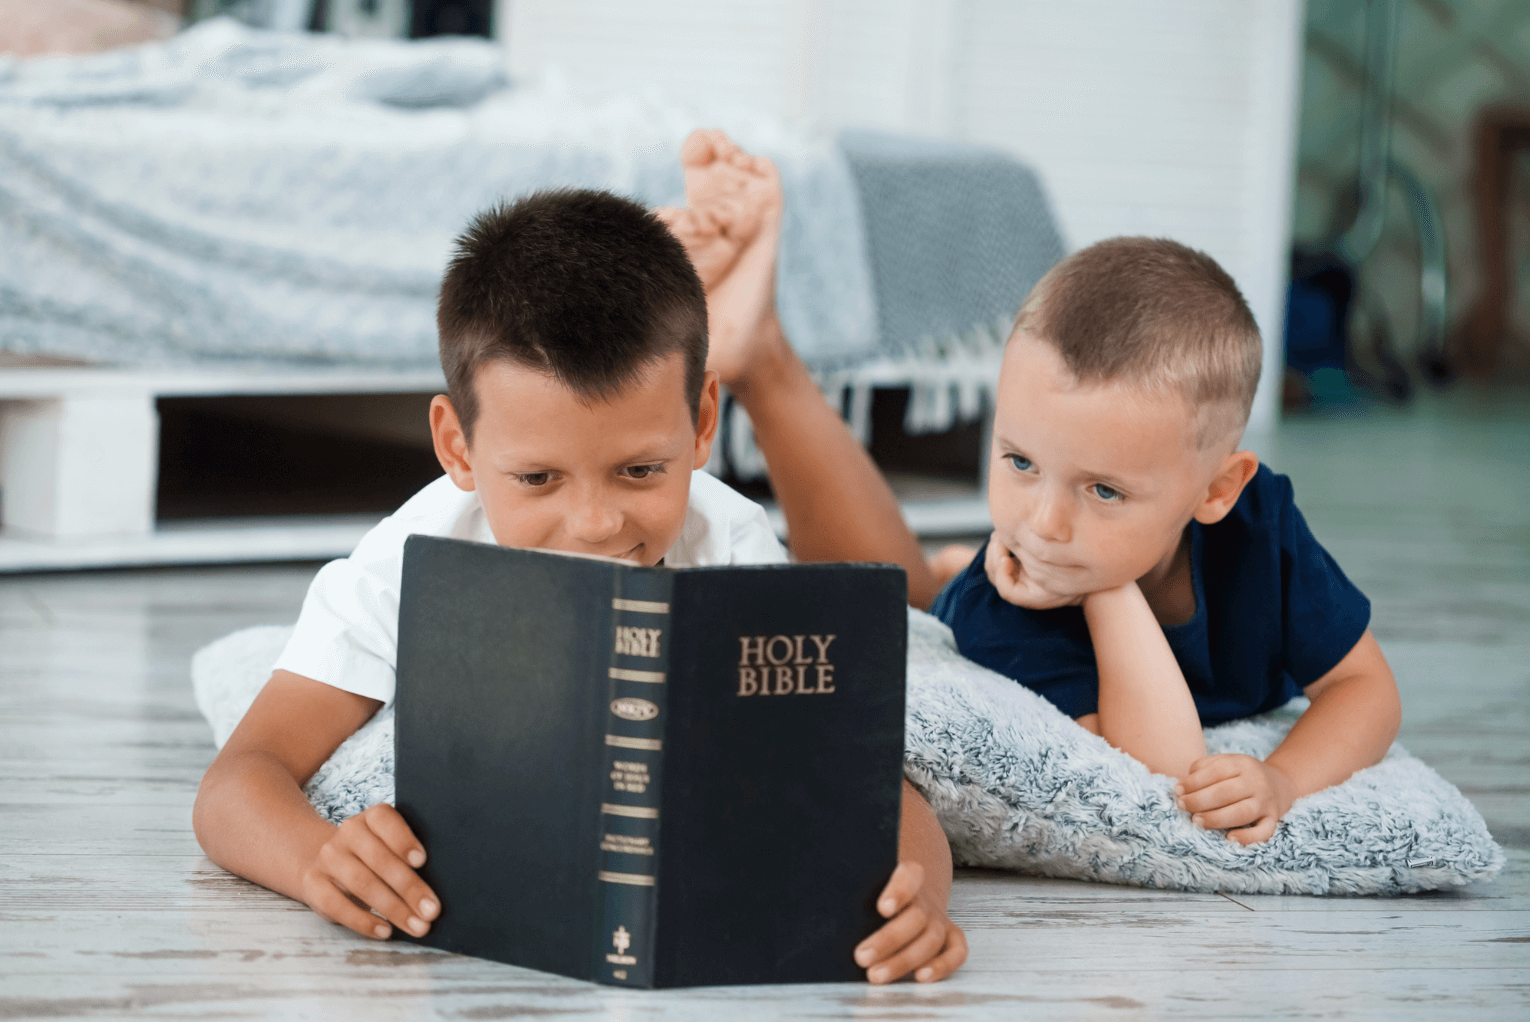 The Unbiblical Bible Coming for Your Kids